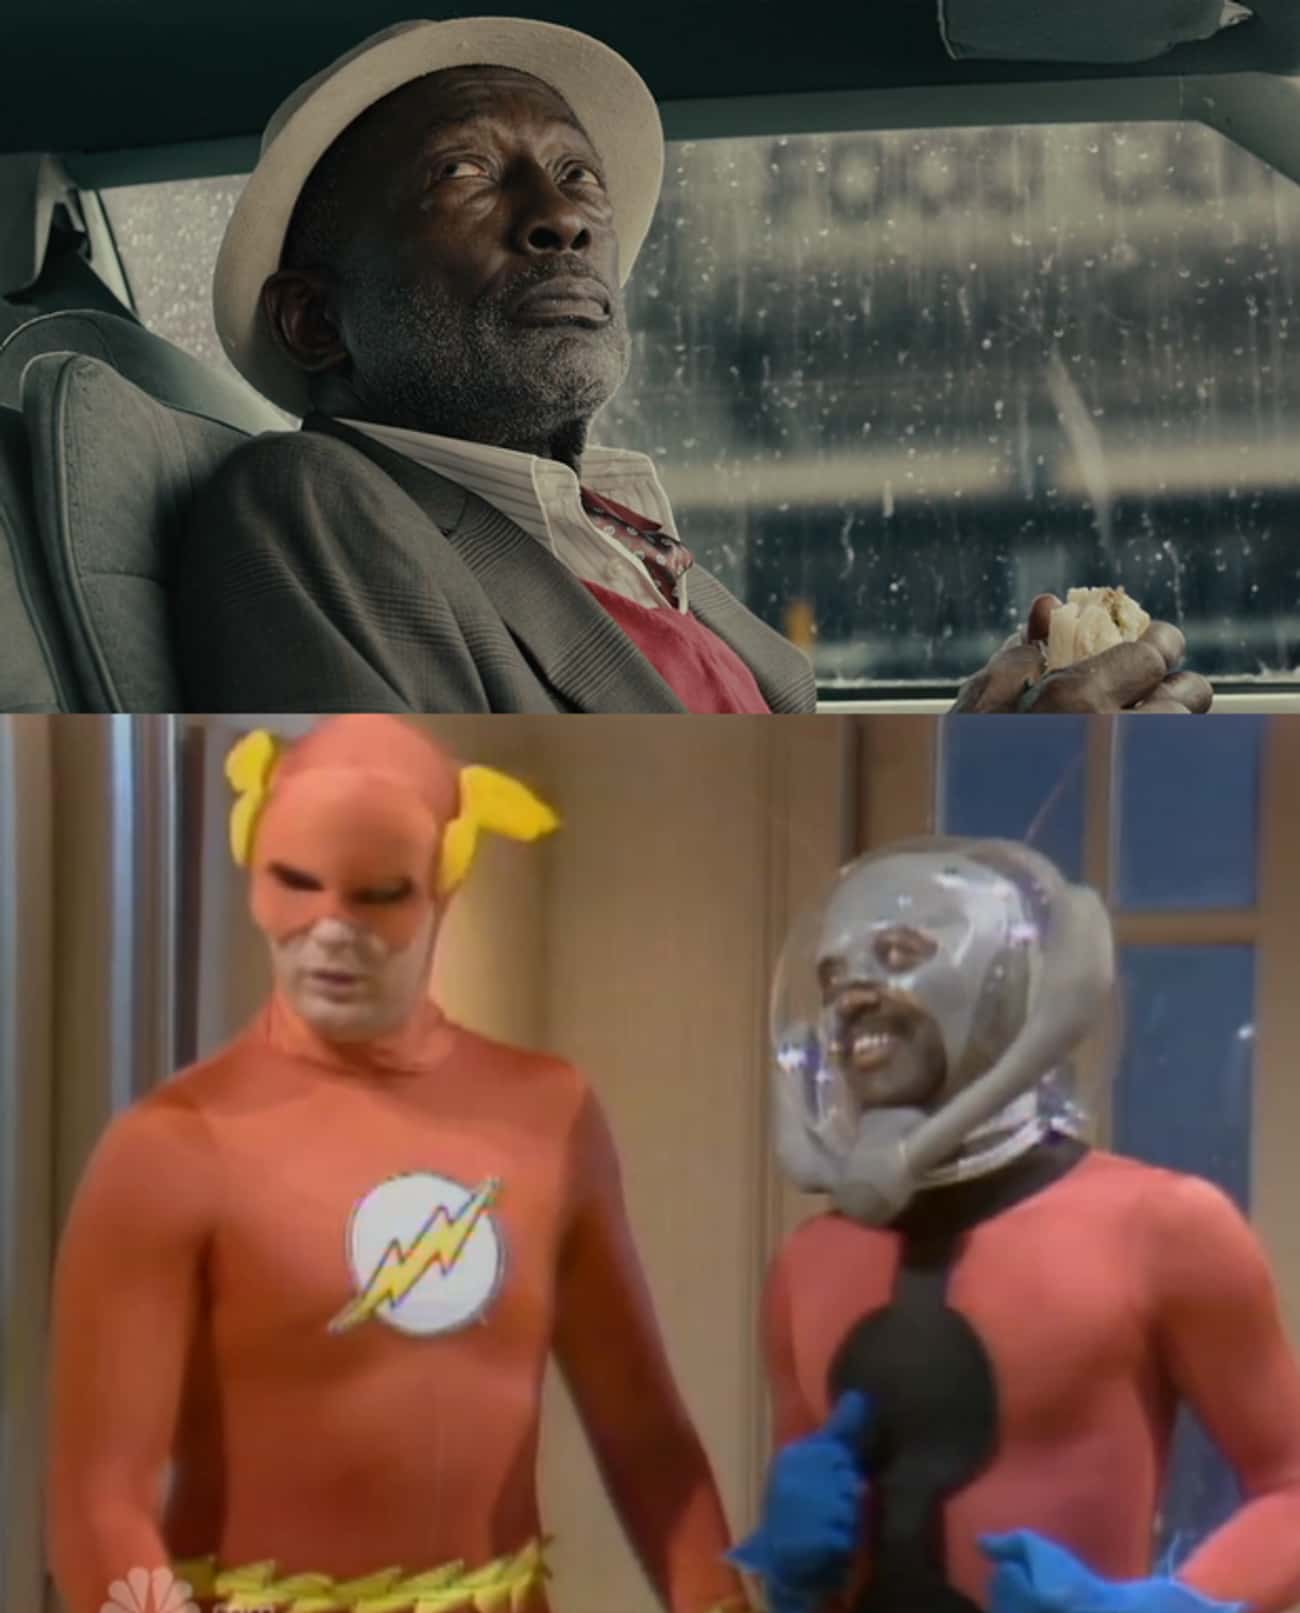 Actor Garrett Morris makes a brief appearance in a scene. Morris was the first person to ever portray Ant-Man in a 1979 'Saturday Night Live' skit called Superhero Party.